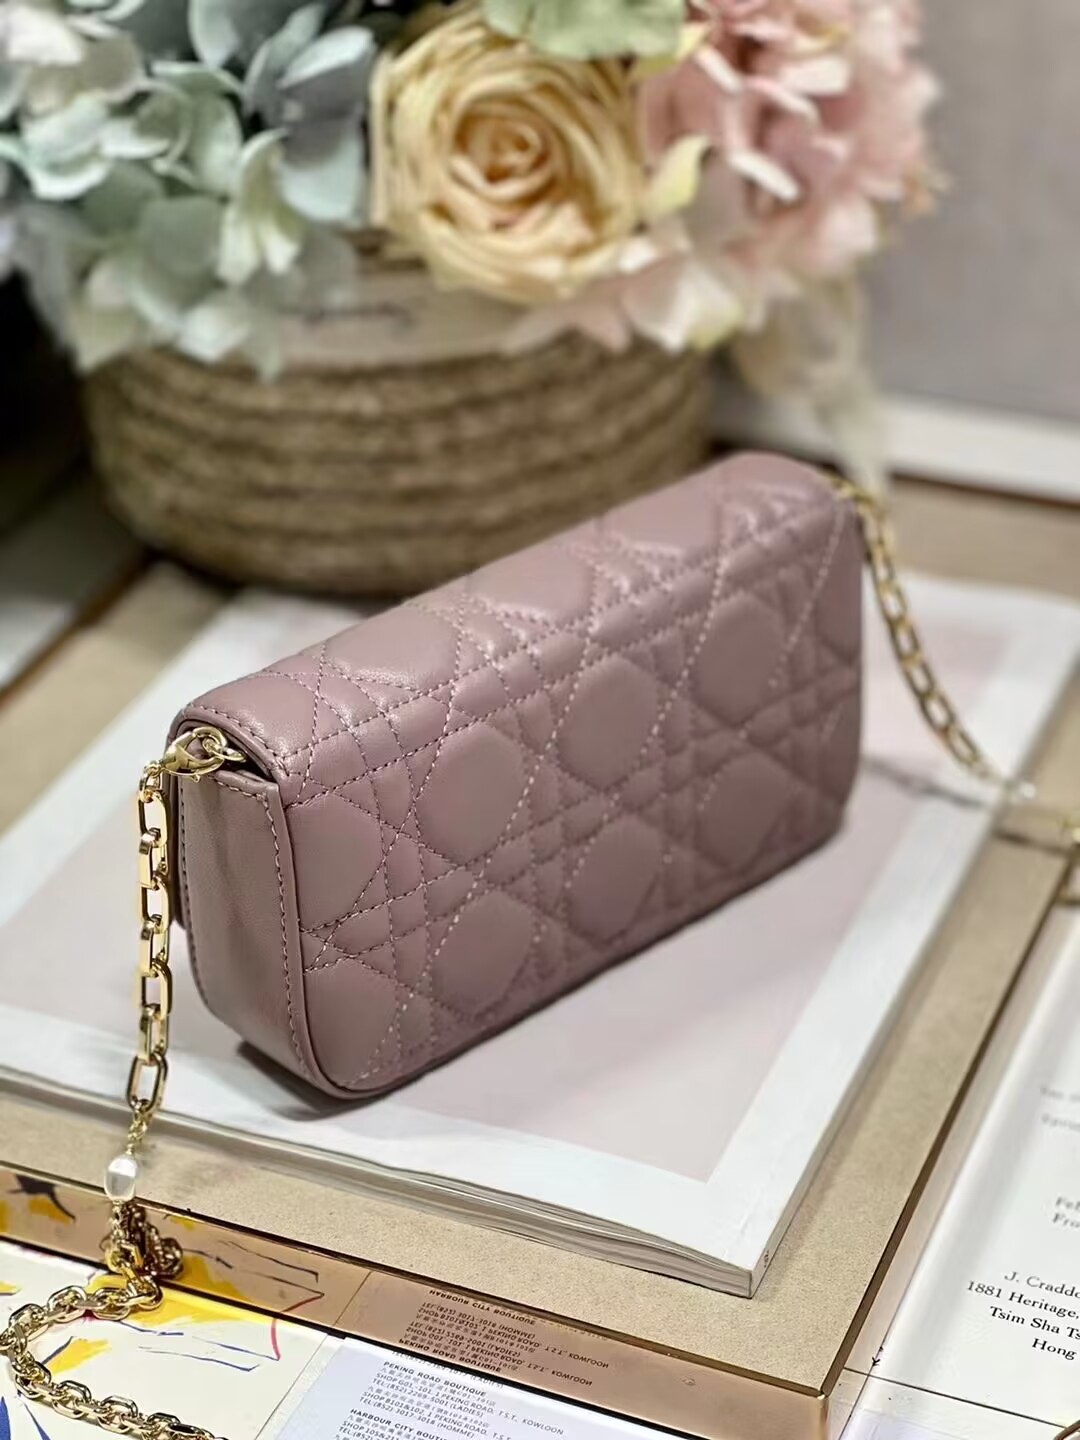 LADY DIOR PHONE POUCH Aesthetic Cannage Lambskin S0977OE pink